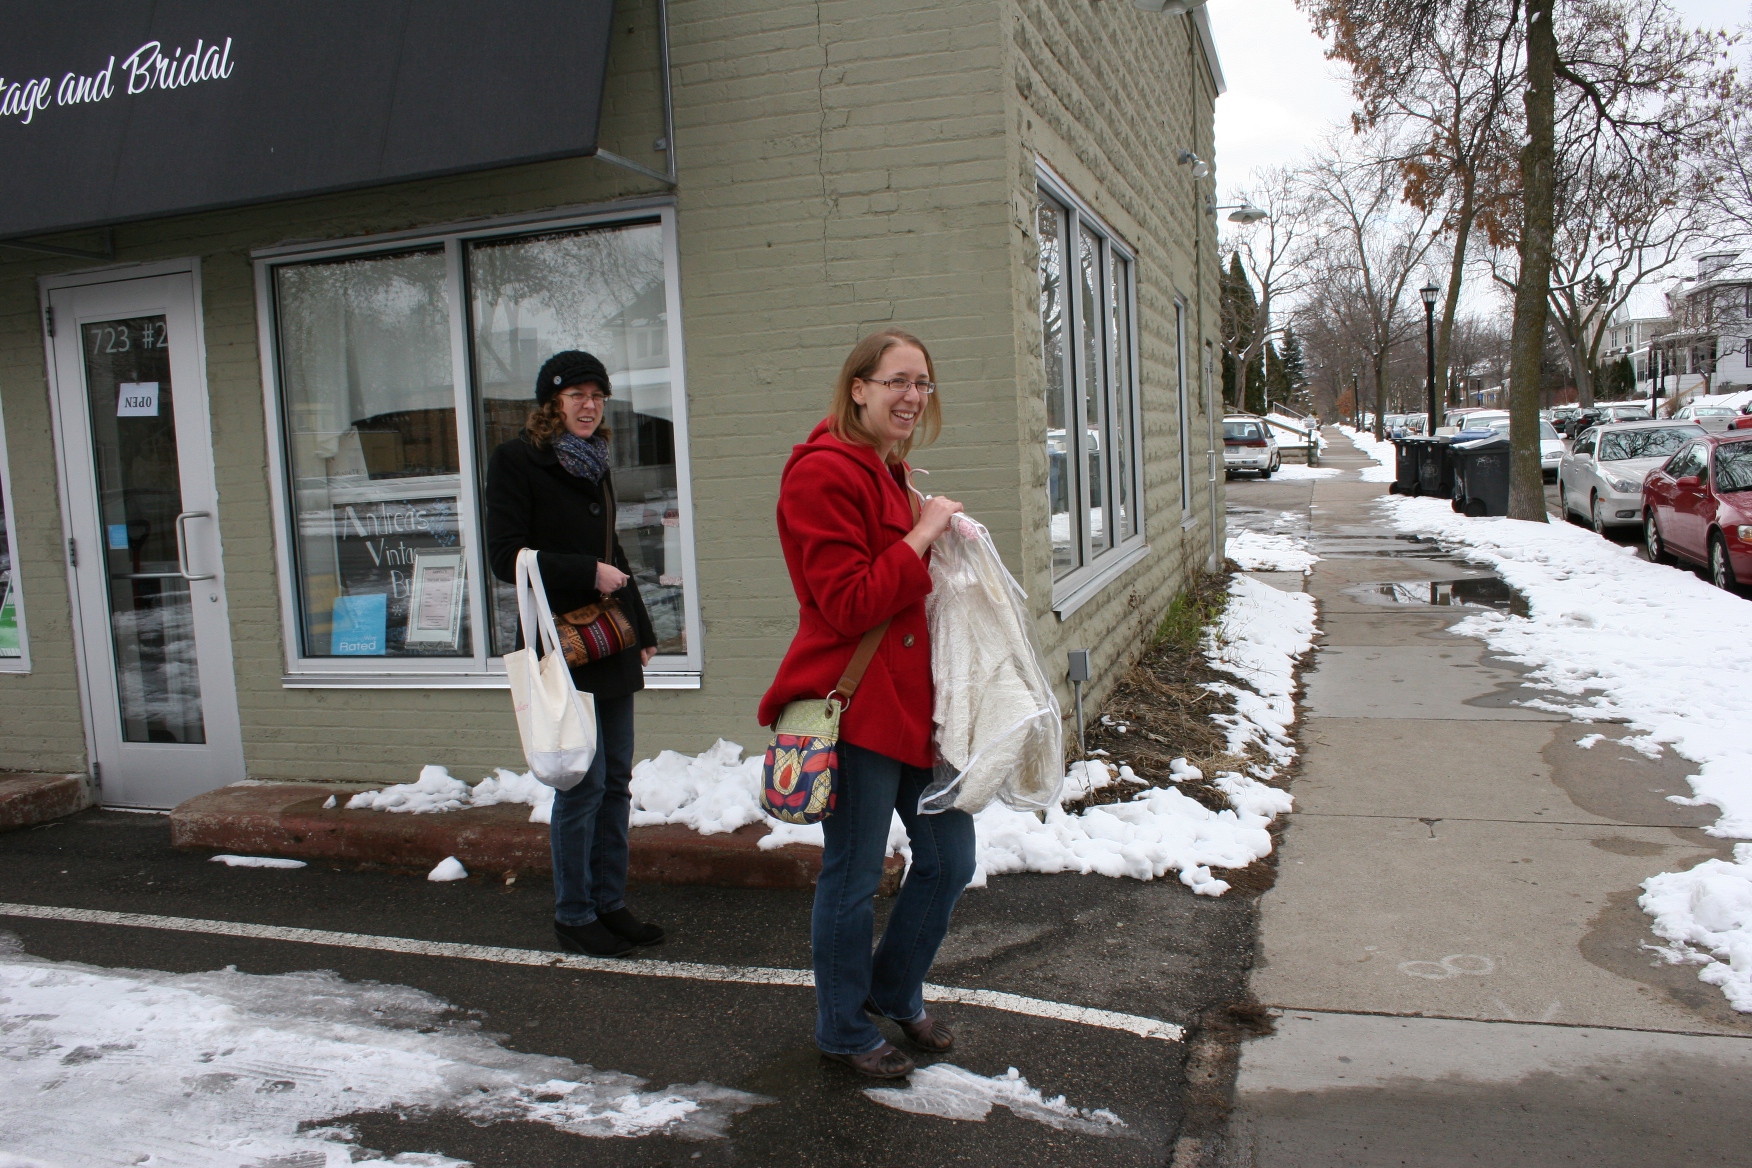 My daughters leave Andrea's Vintage Bridal after Amber, right, finds her "perfect" wedding dress.